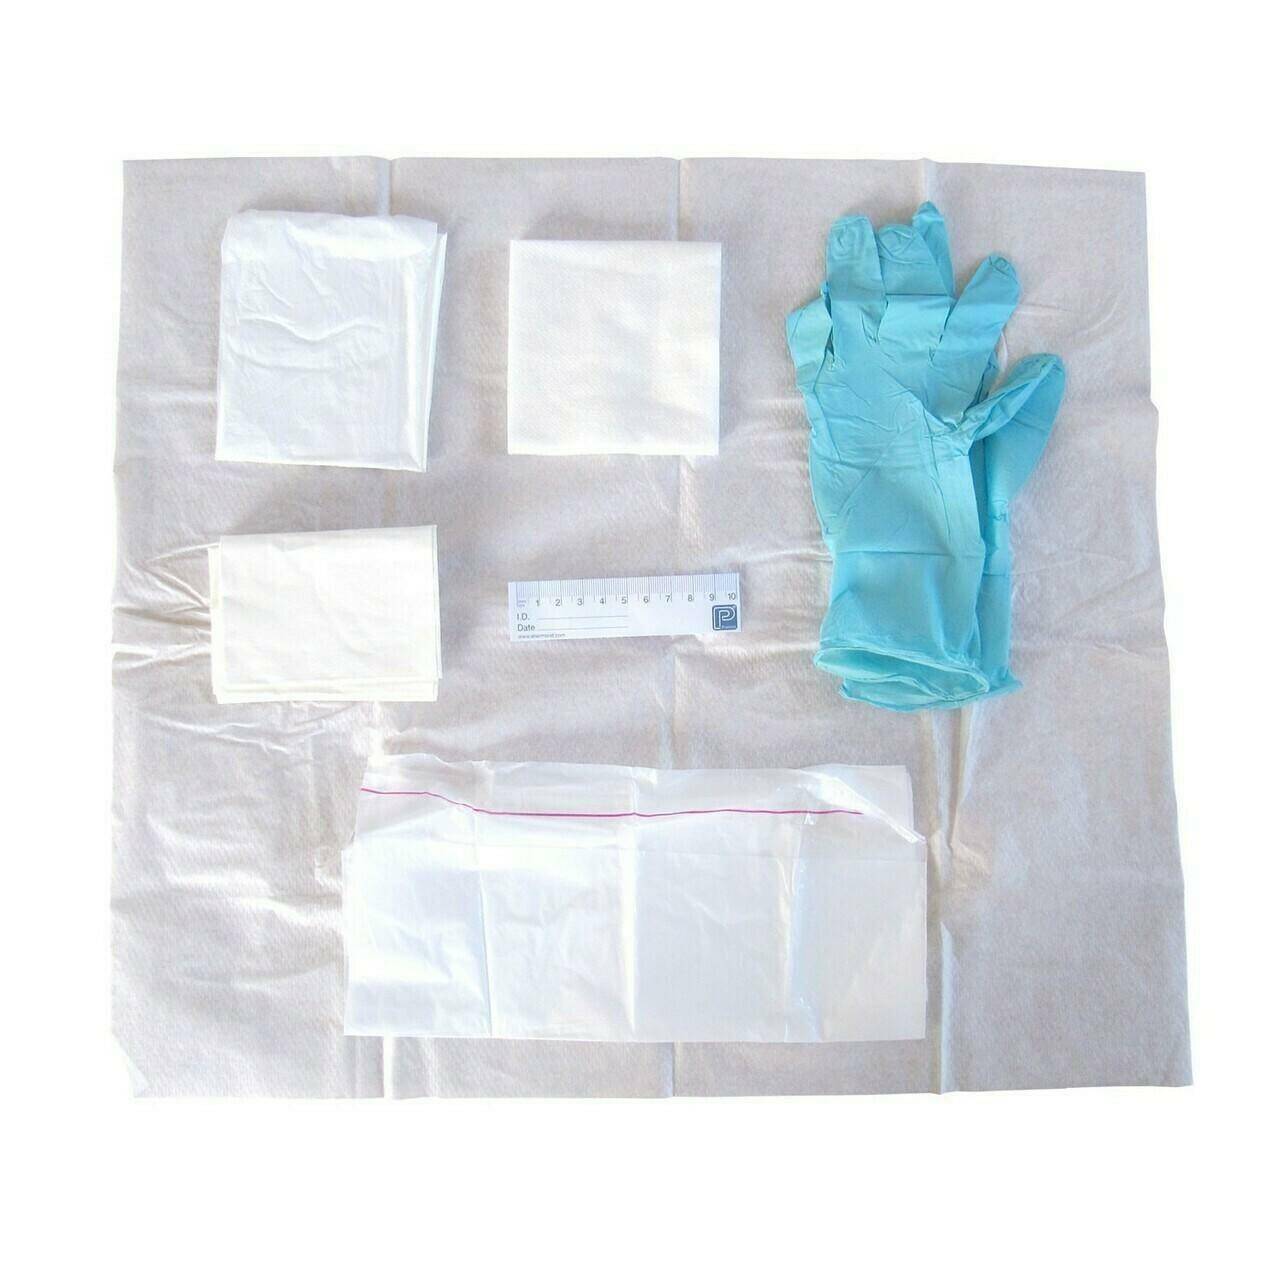 Polyfield Patient Pack with Nitrile Gloves - UKMEDI